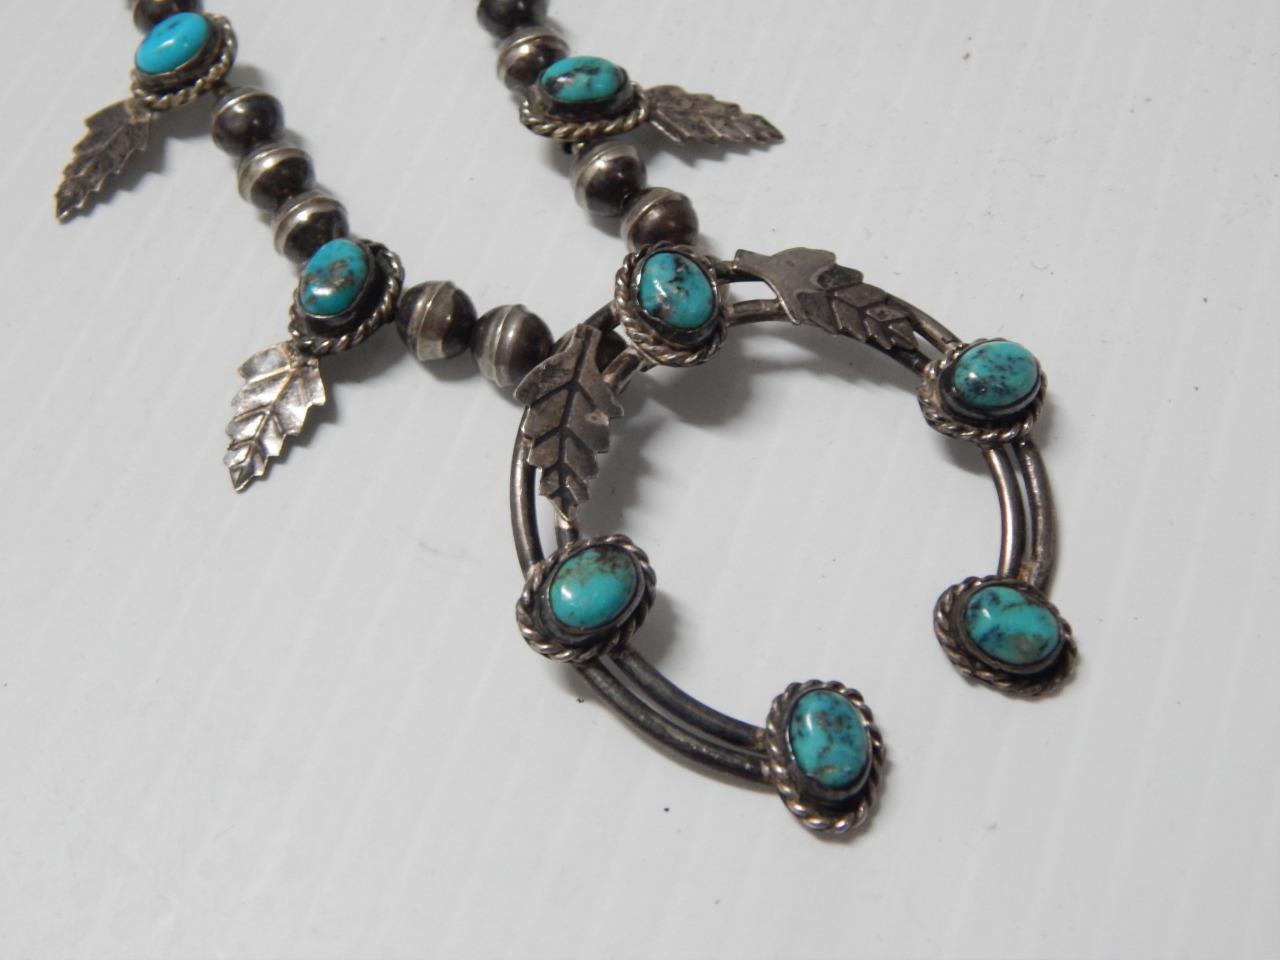 VINTAGE NAVAJO INDIAN STERLING SILVER TURQUOISE SQUASH BLOSSOM NAJA NECKLACE